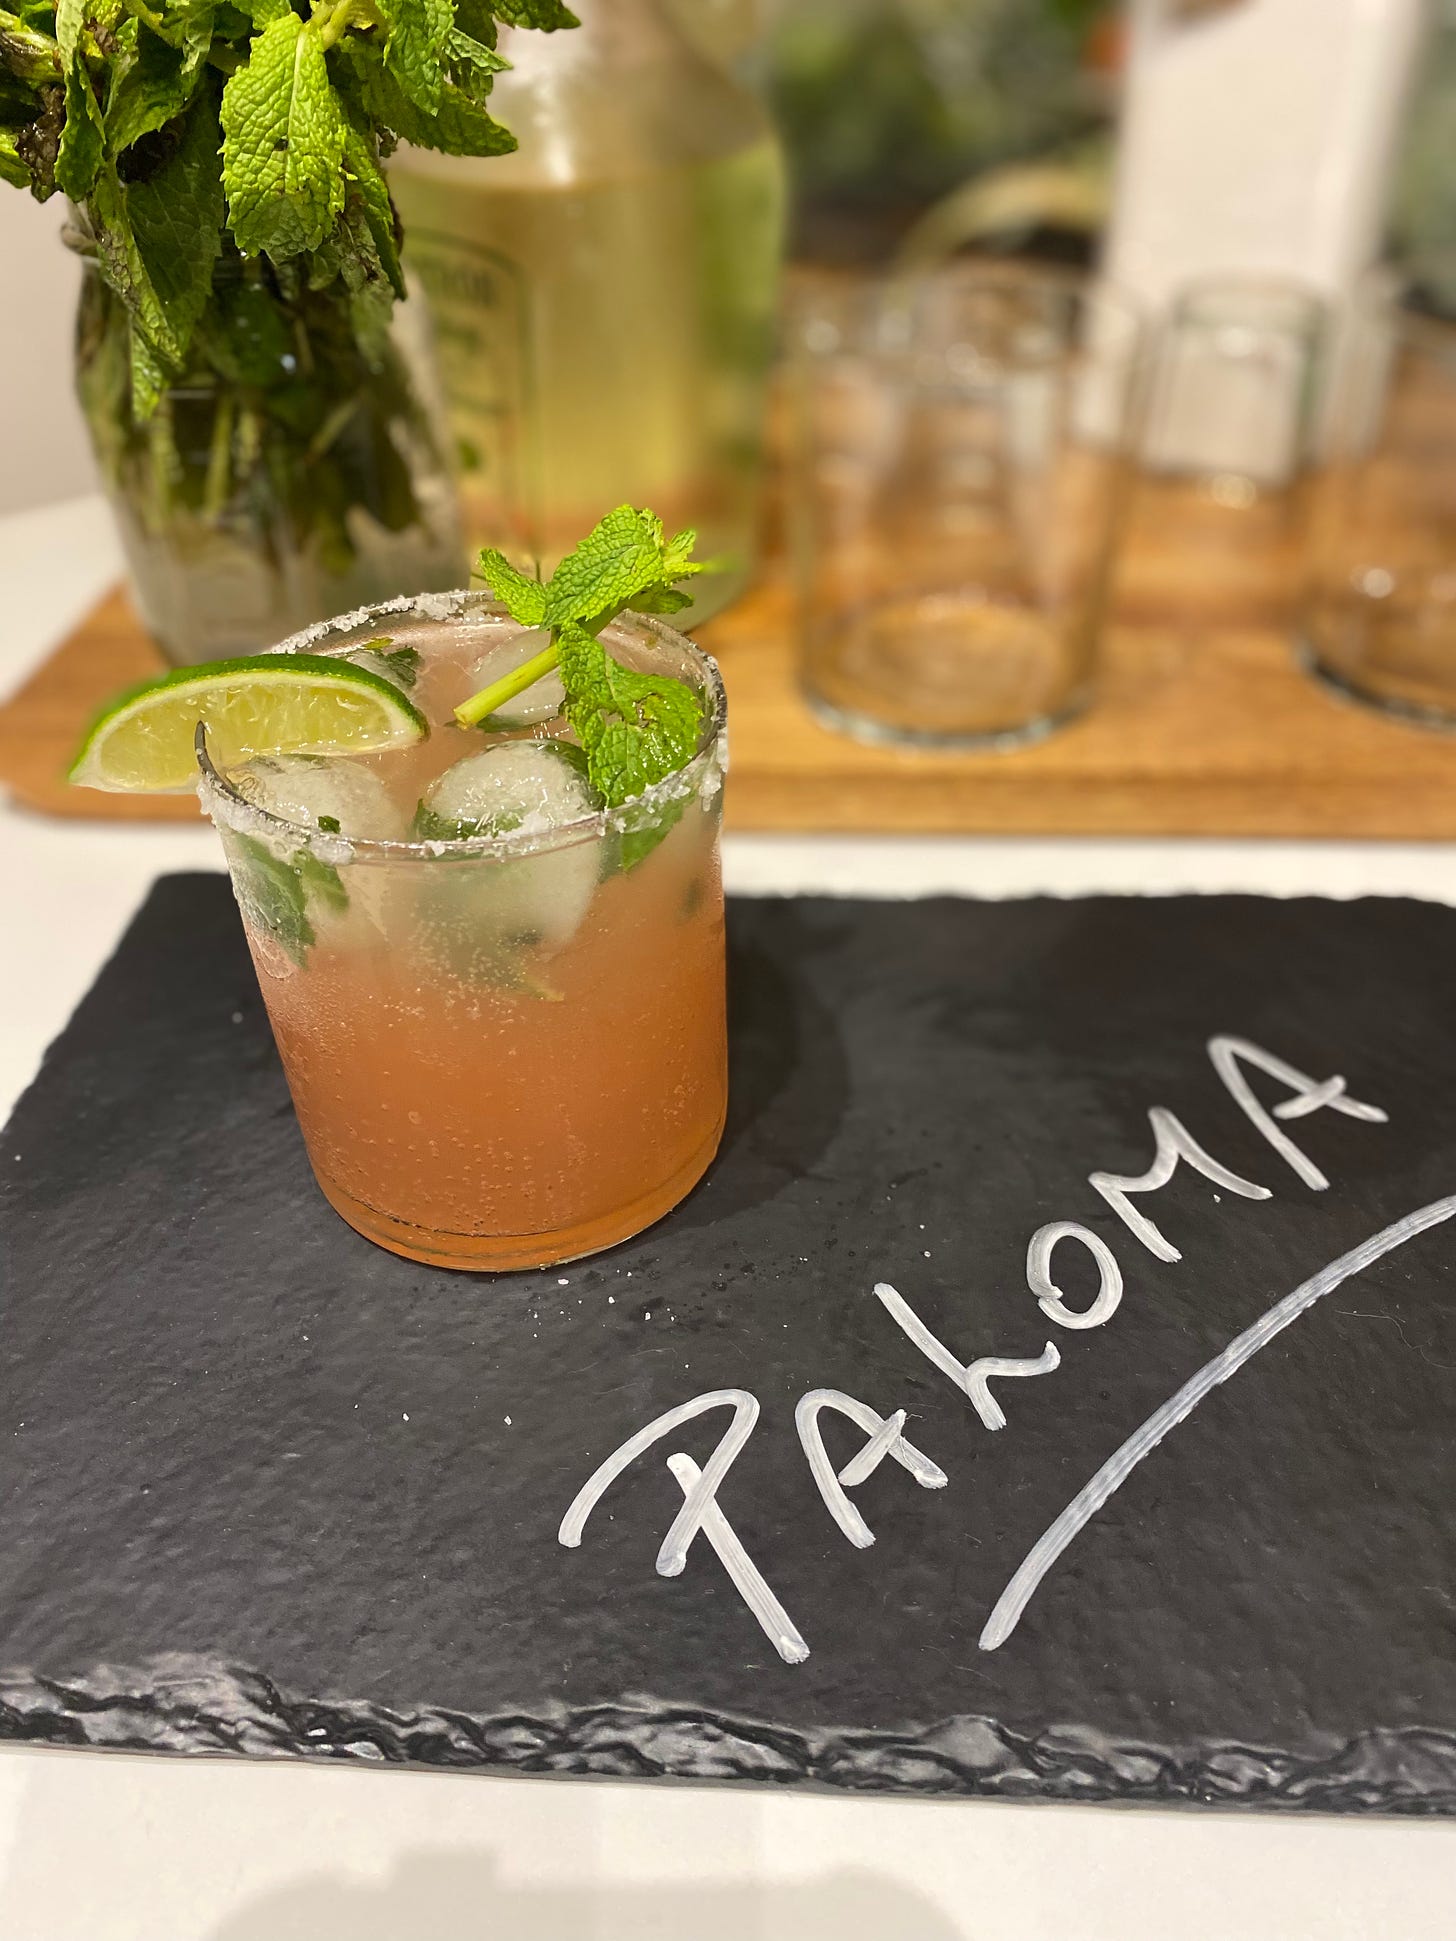 A Paloma drink made with grapefruit soda and topped with mint